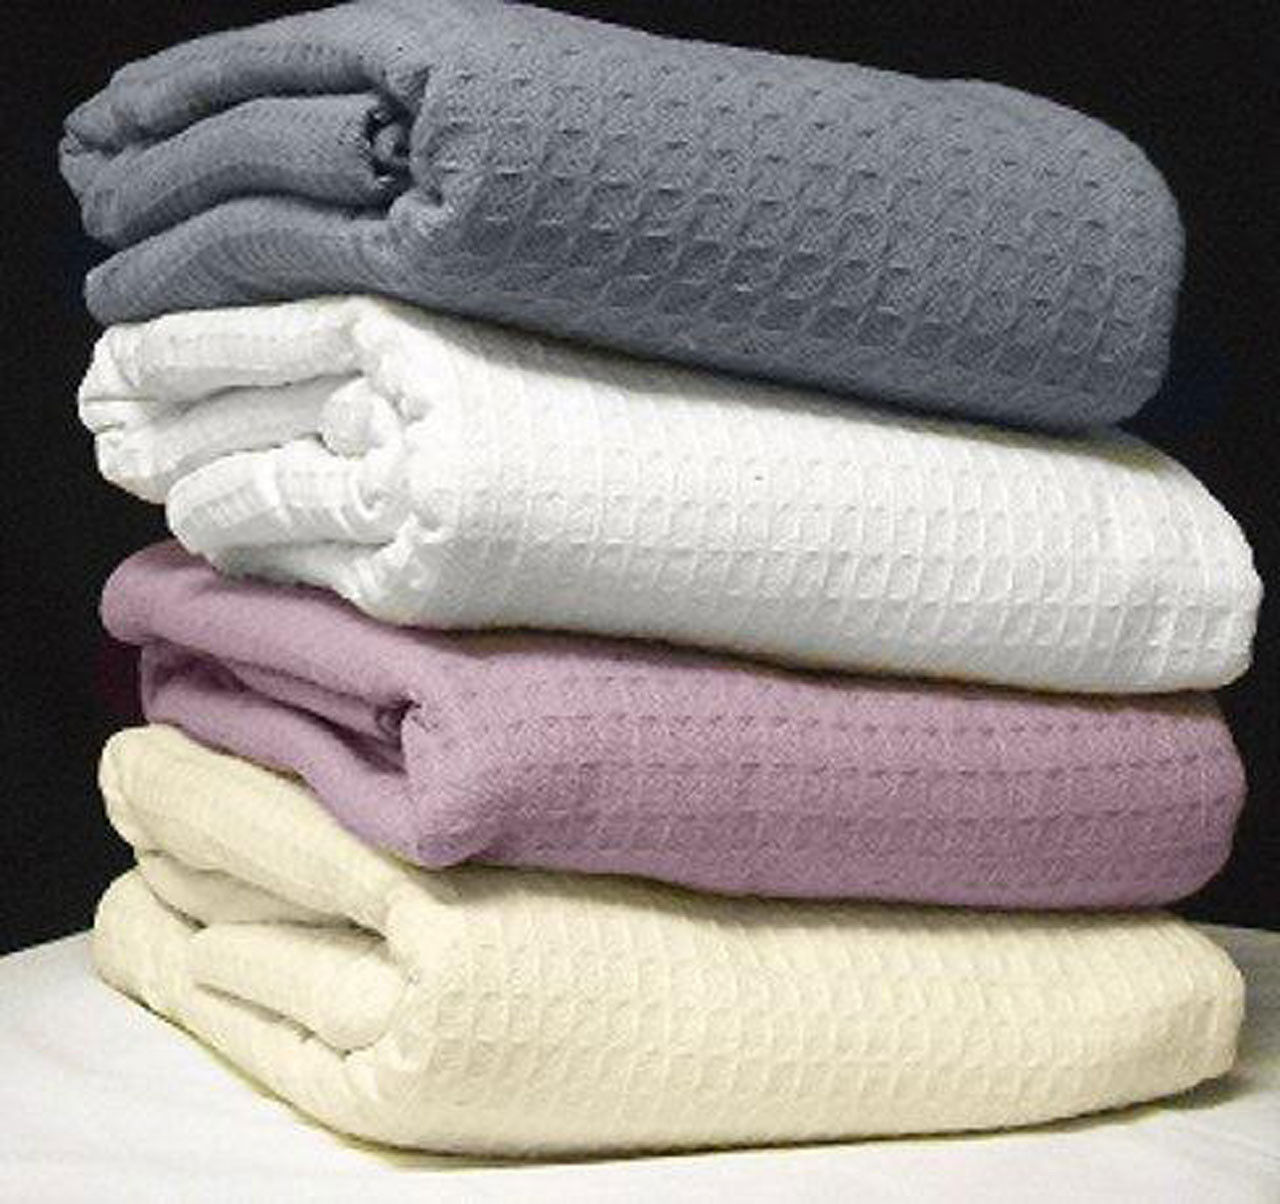 What is the acceptable shrinkage for a Santa Clarita blanket made of cotton thermal?